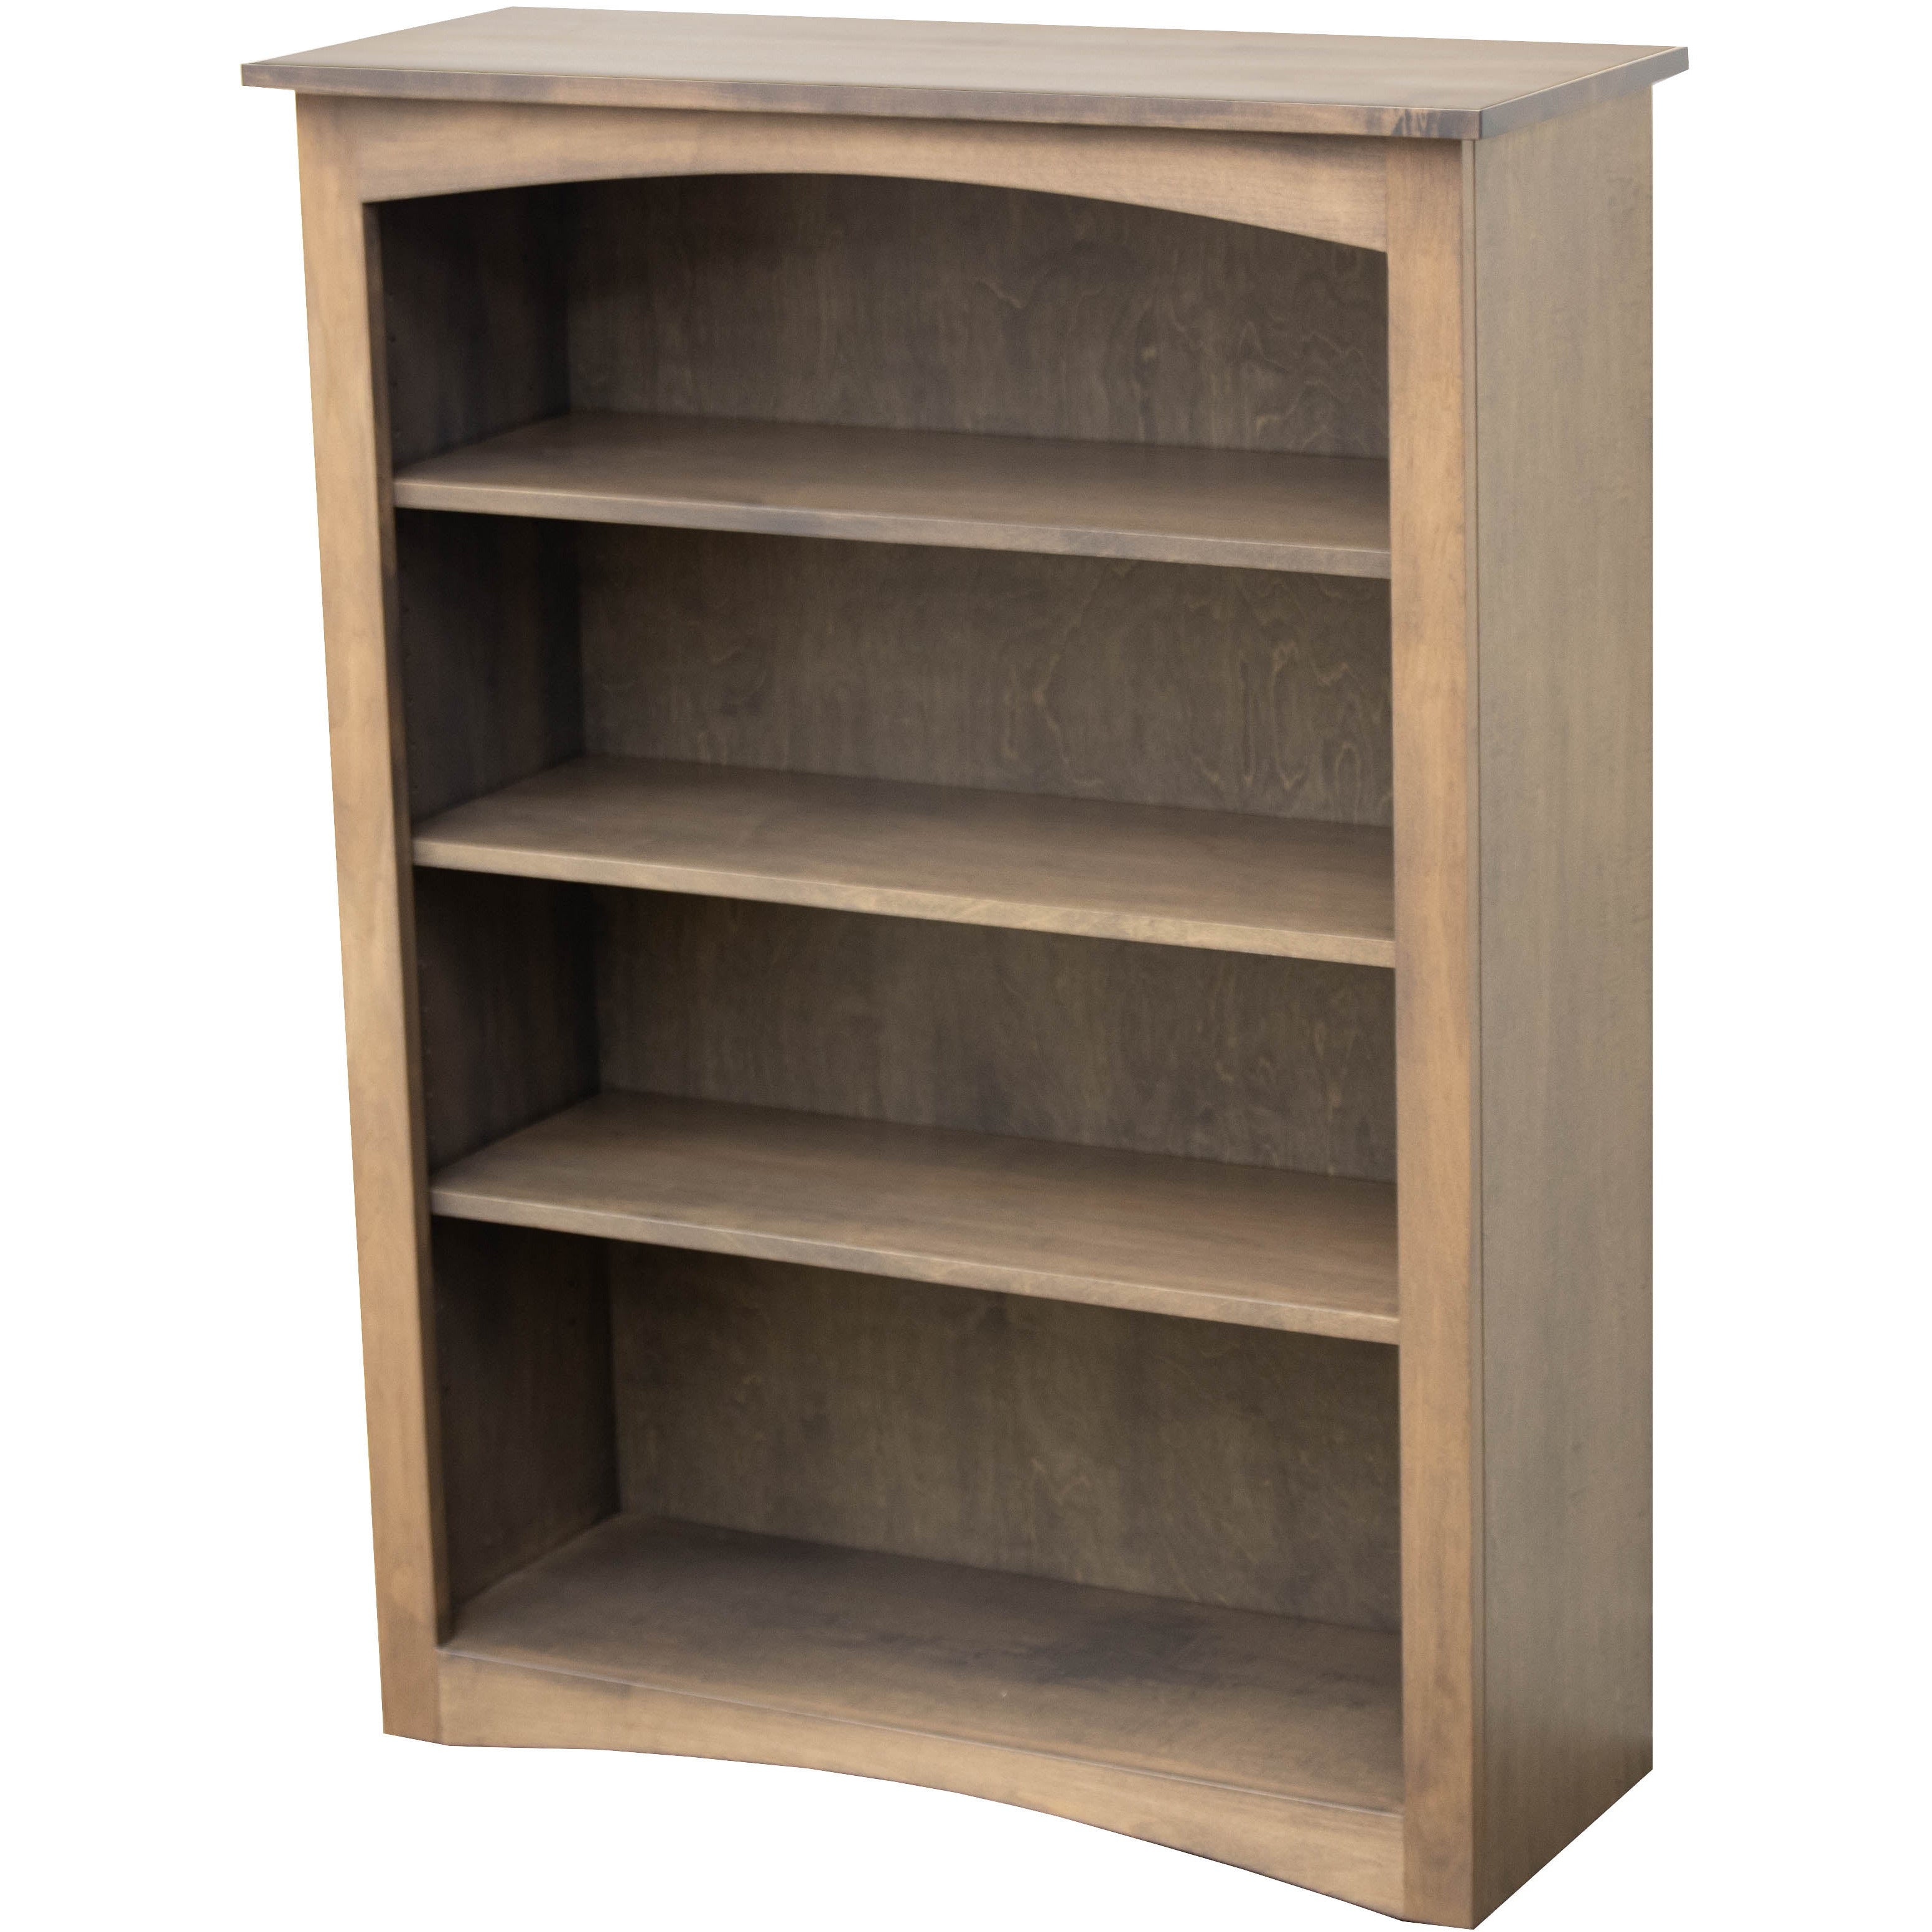 Shaker Solid Wood Bookcase, 48"